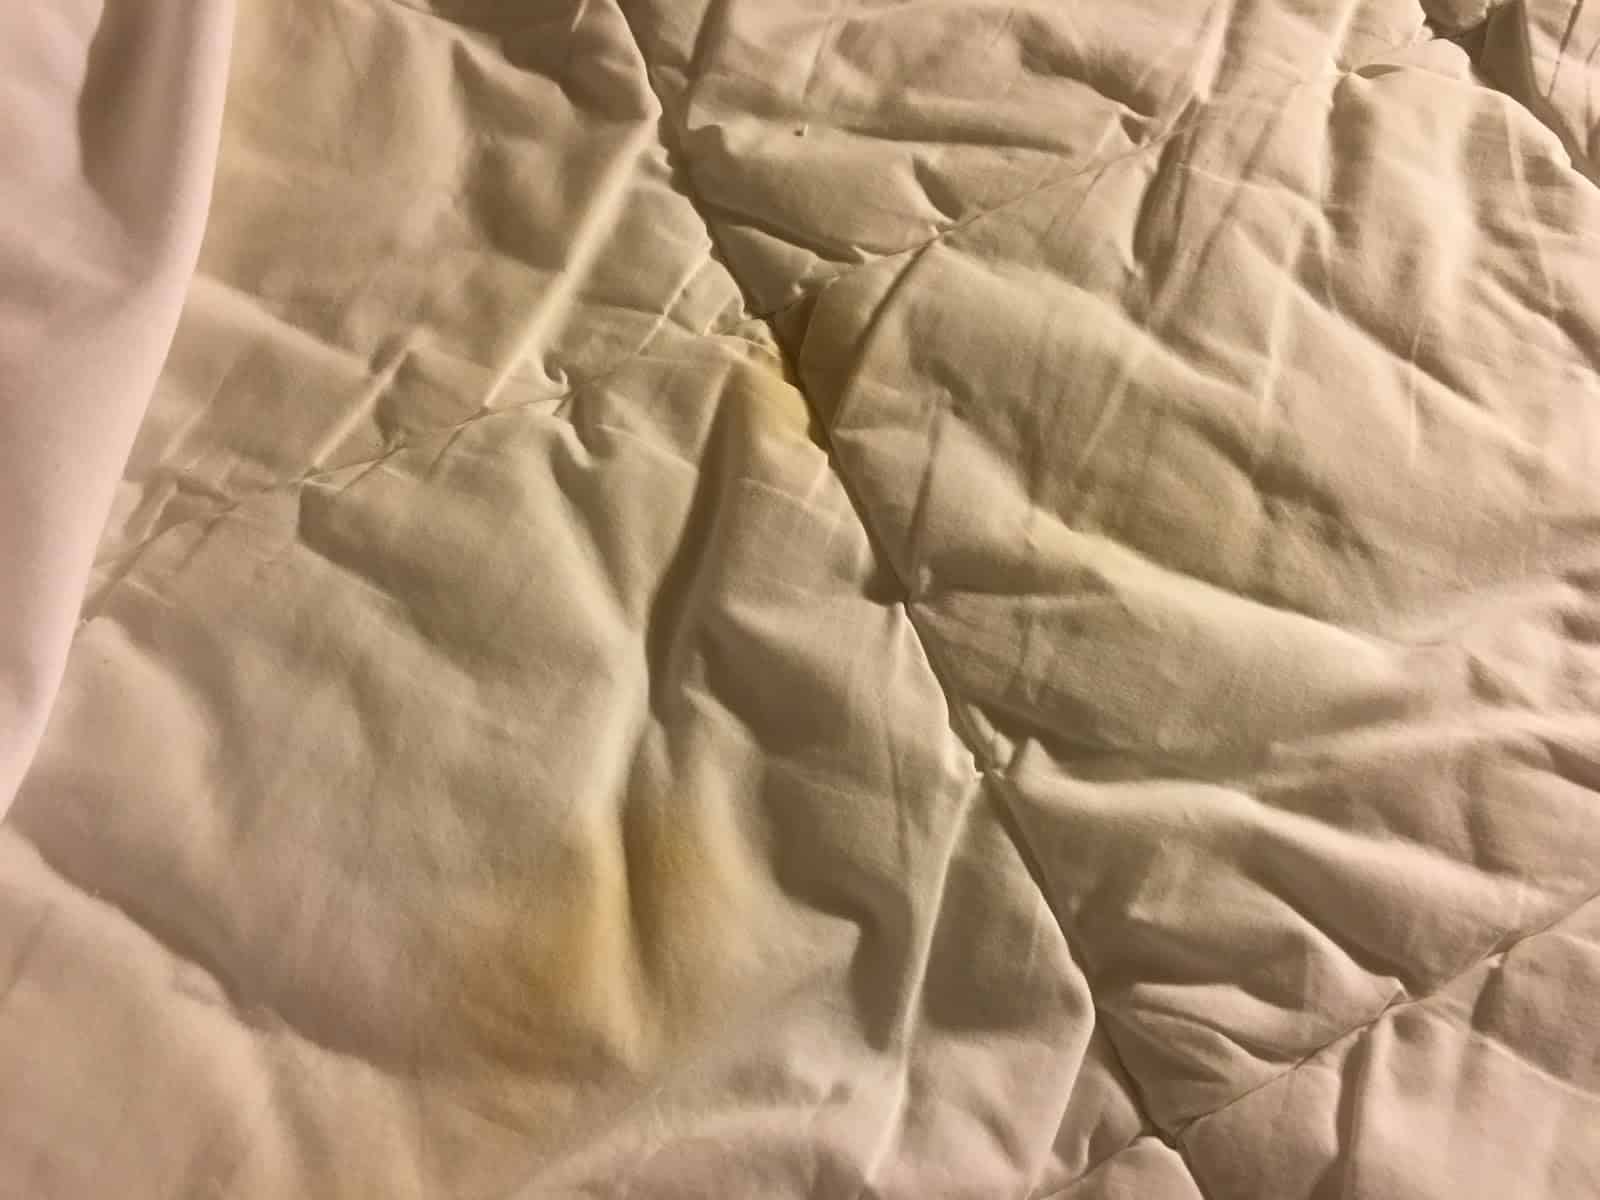 Urine soaked sheets at Rodeway Inn in Española, New Mexico